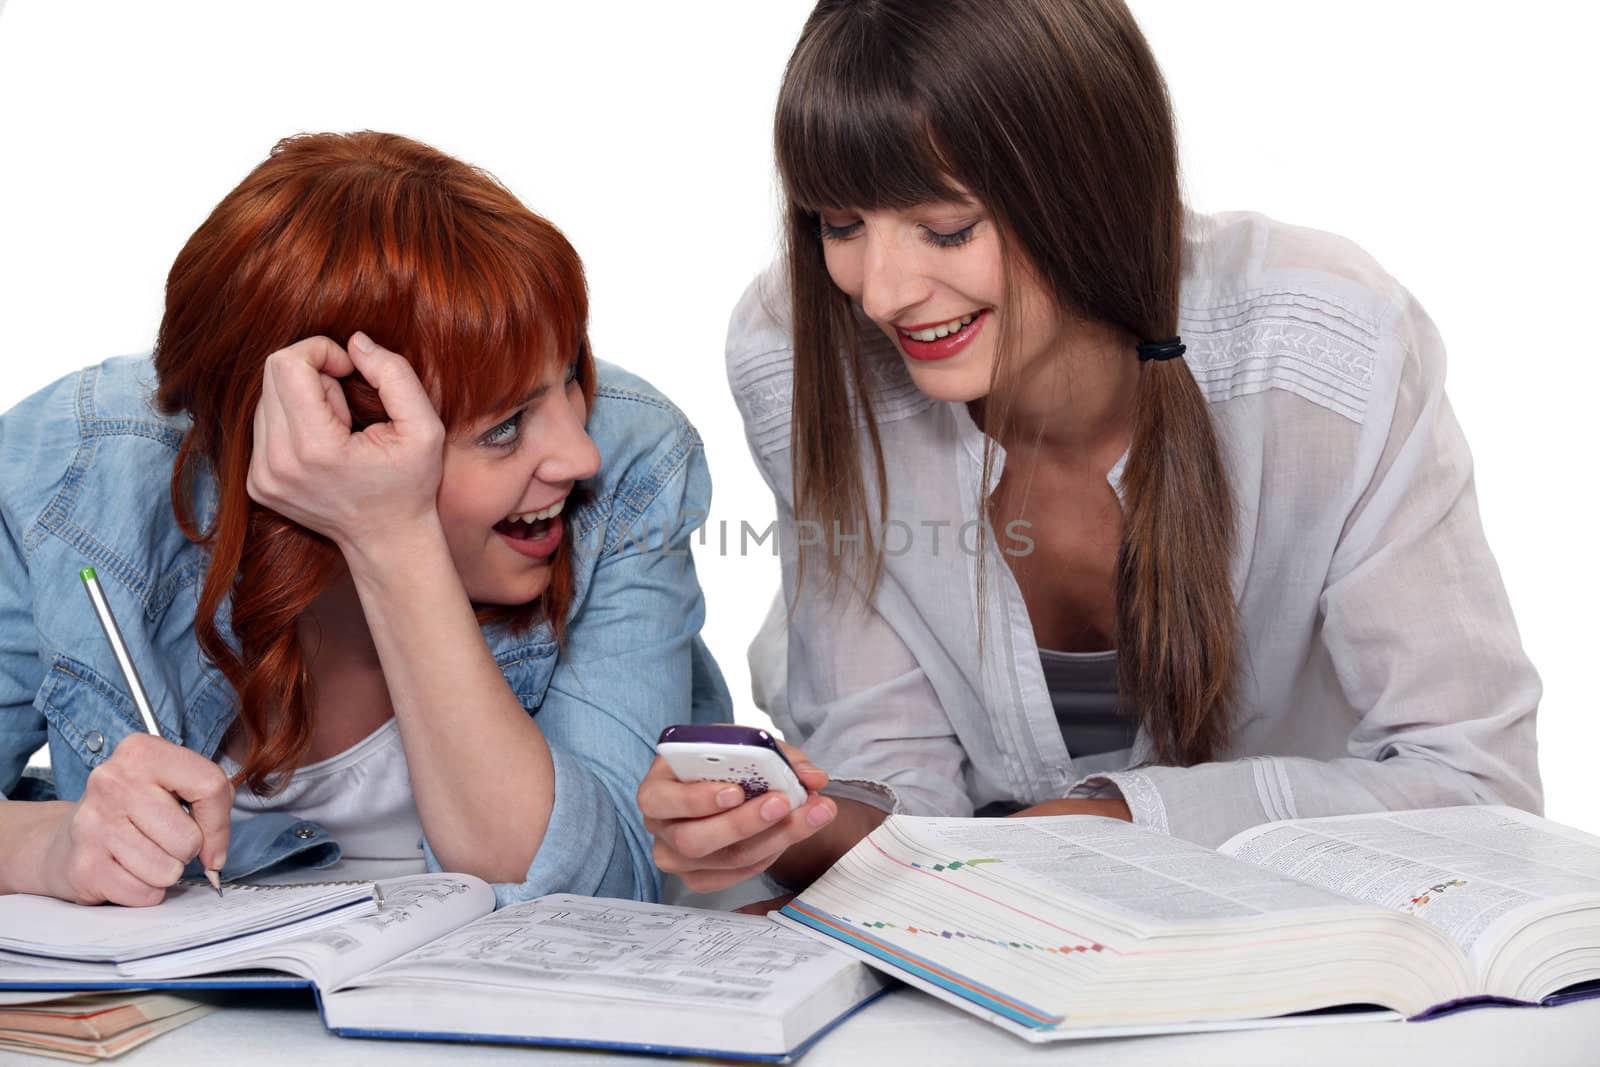 two girlfriends studying and having fun together by phovoir